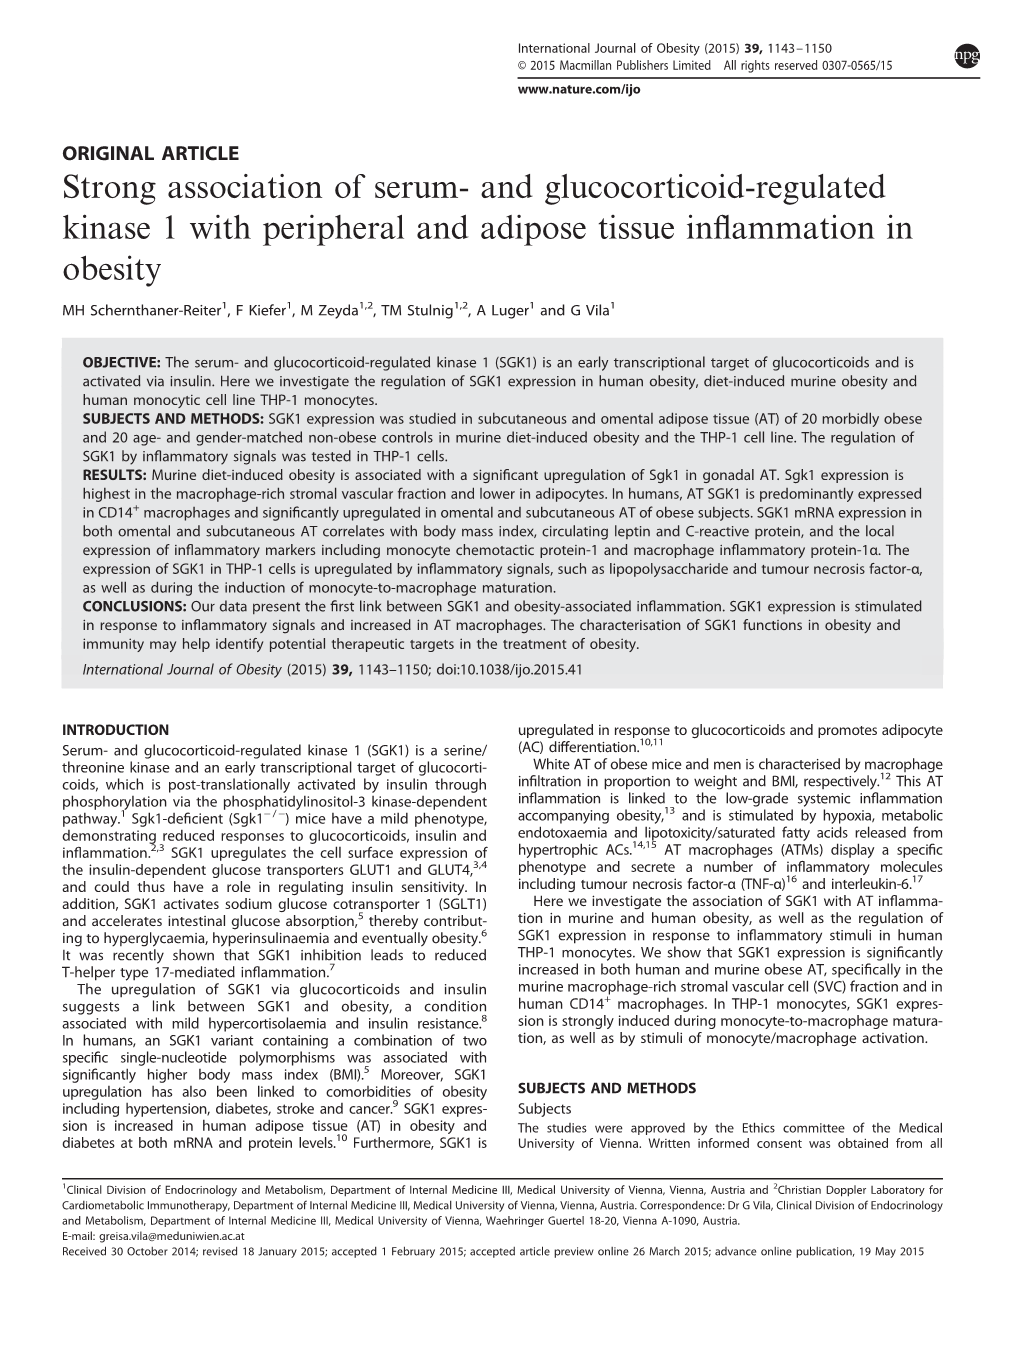 Strong Association of Serum- and Glucocorticoid-Regulated Kinase 1 with Peripheral and Adipose Tissue Inflammation in Obesity